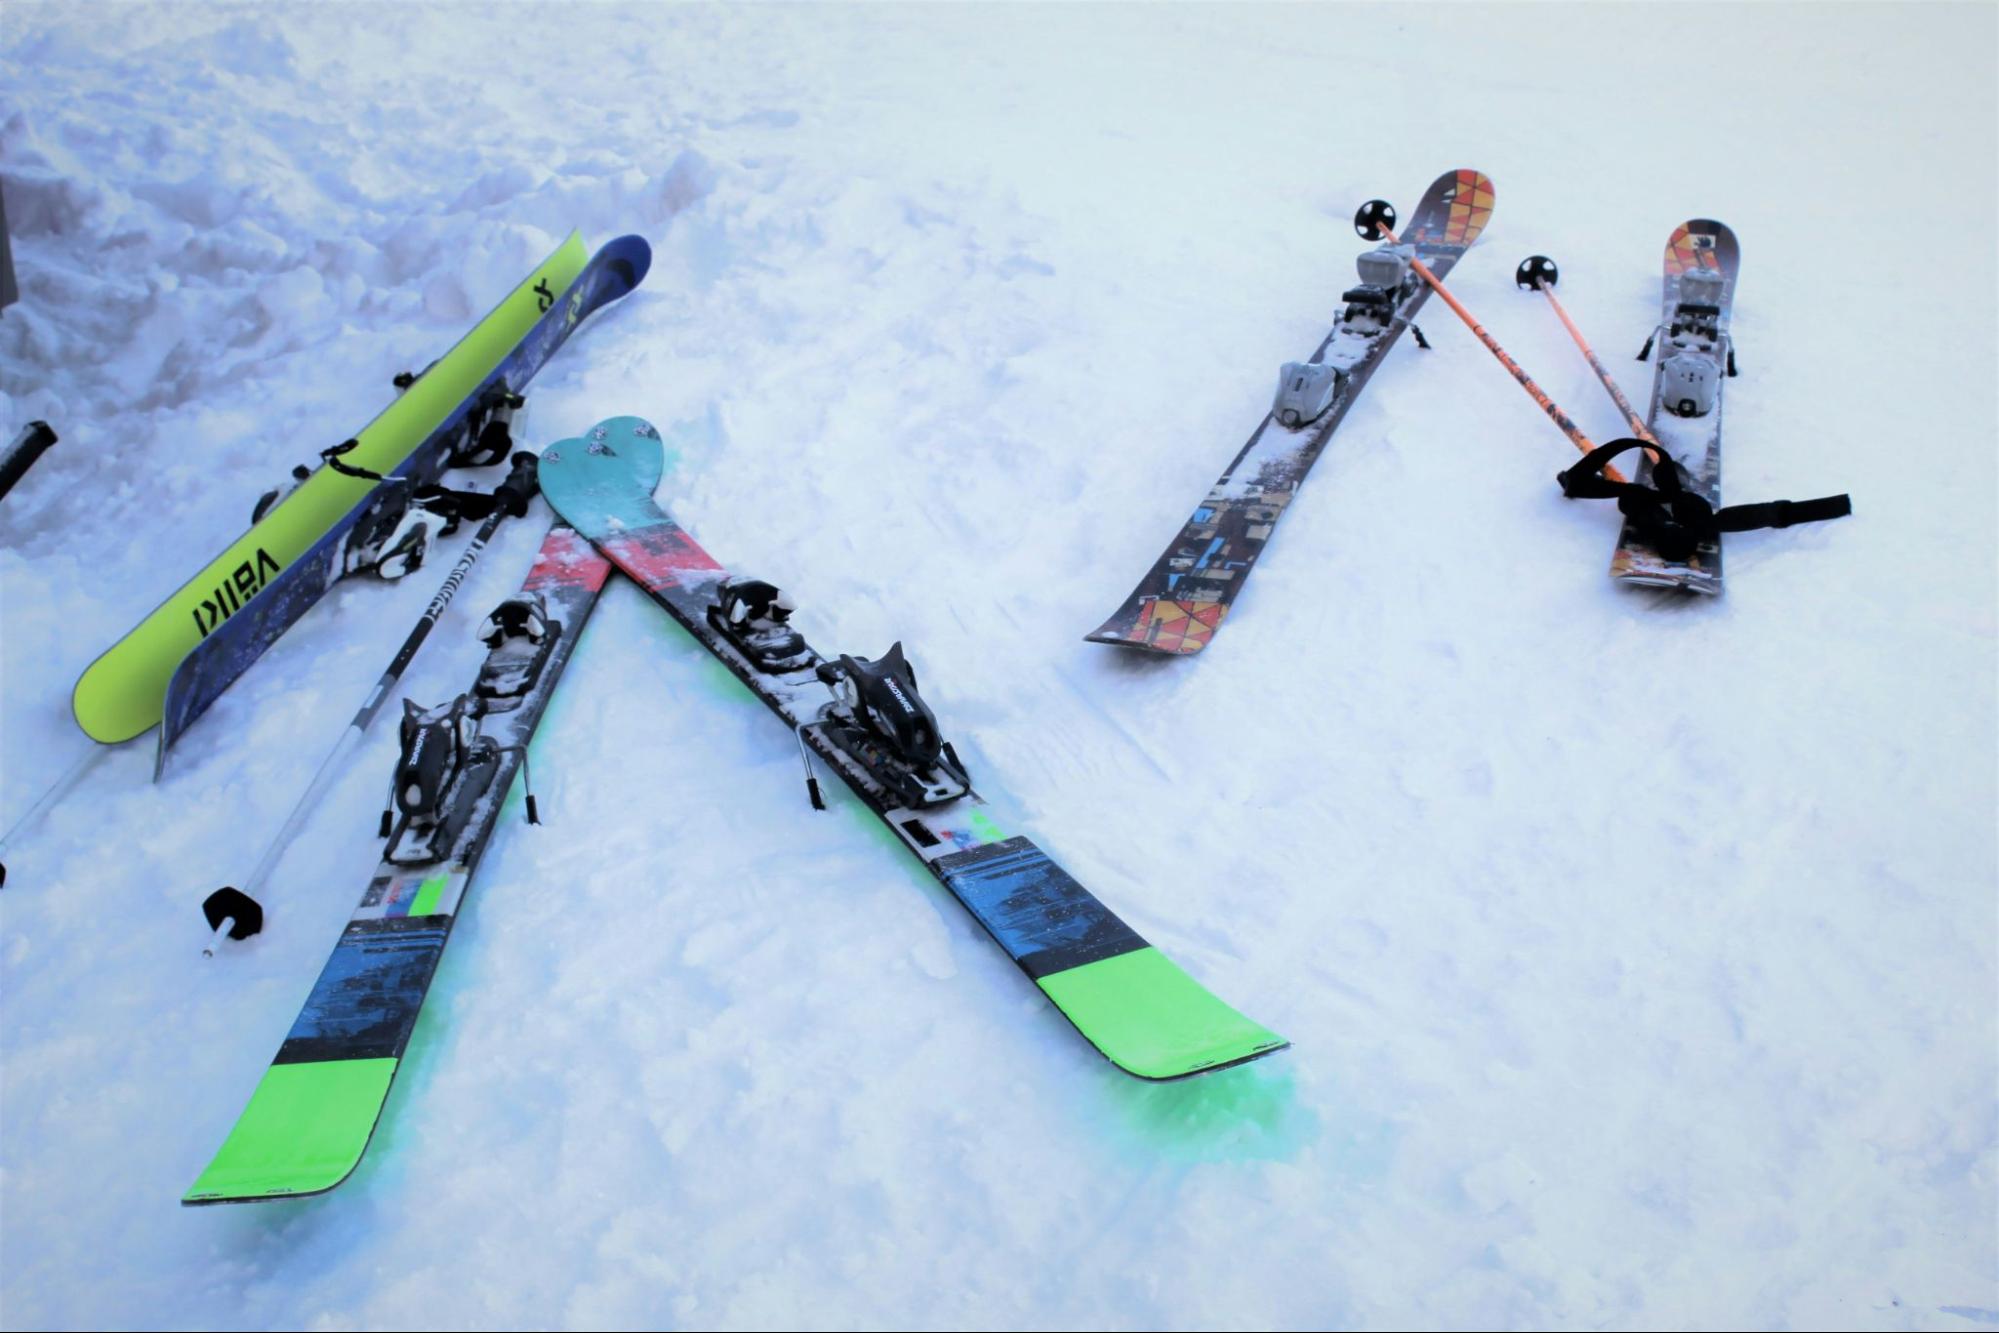 Three sets of skis and poles in the snow